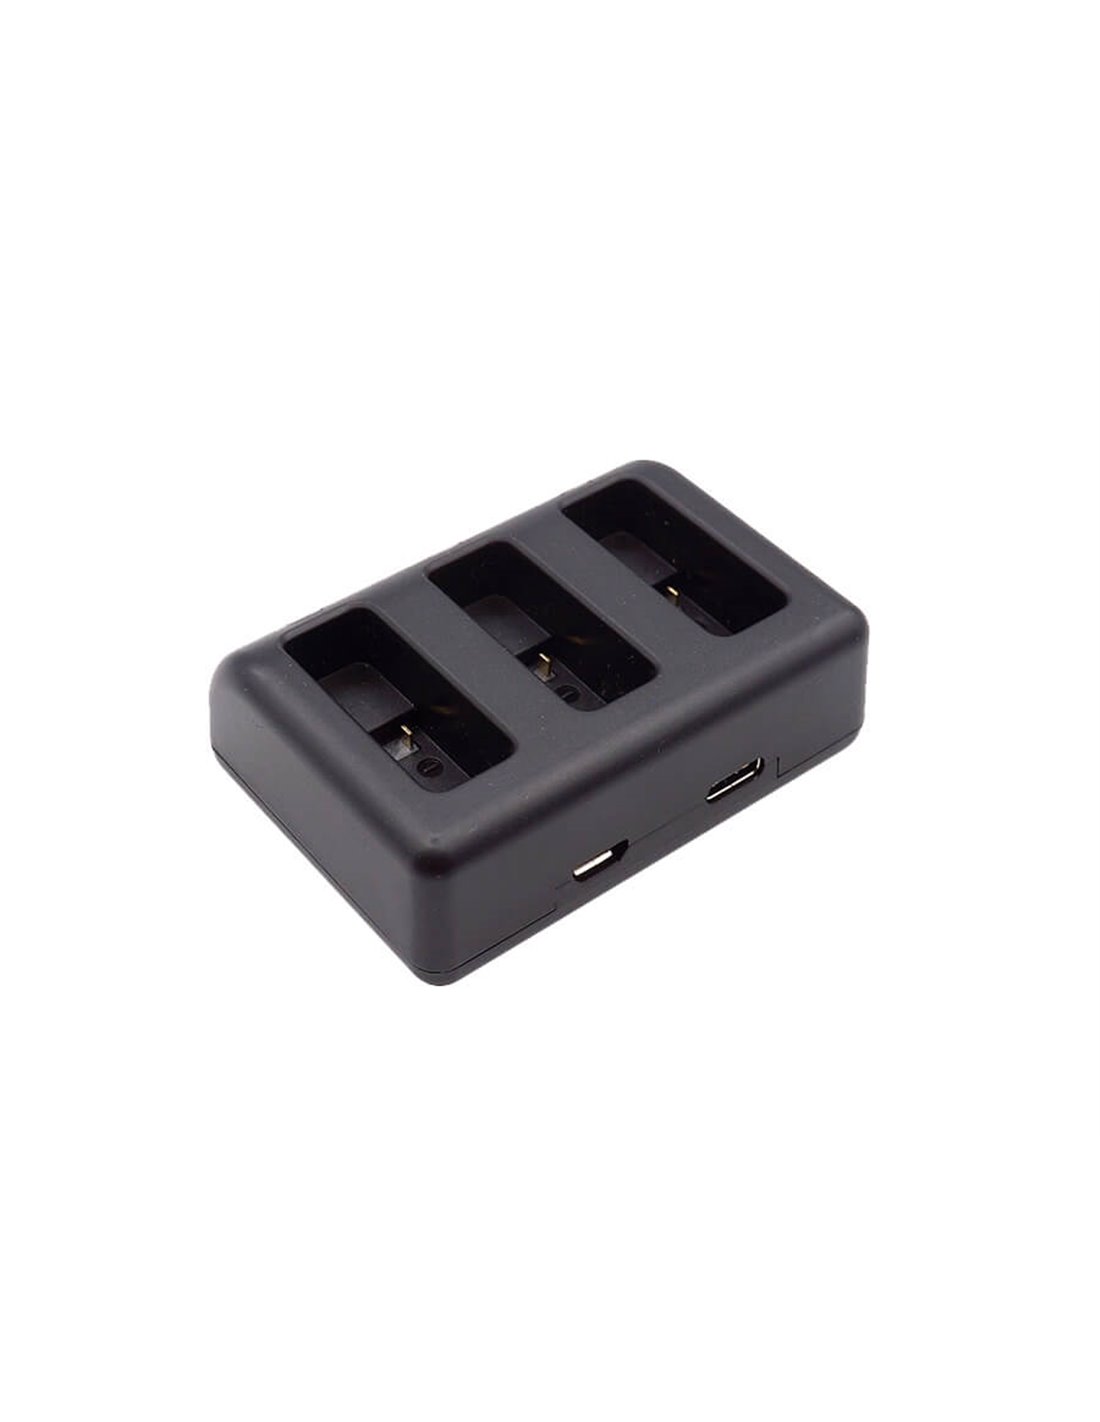 Gopro Triple USB Charger for Chdhx-501, Hero 5